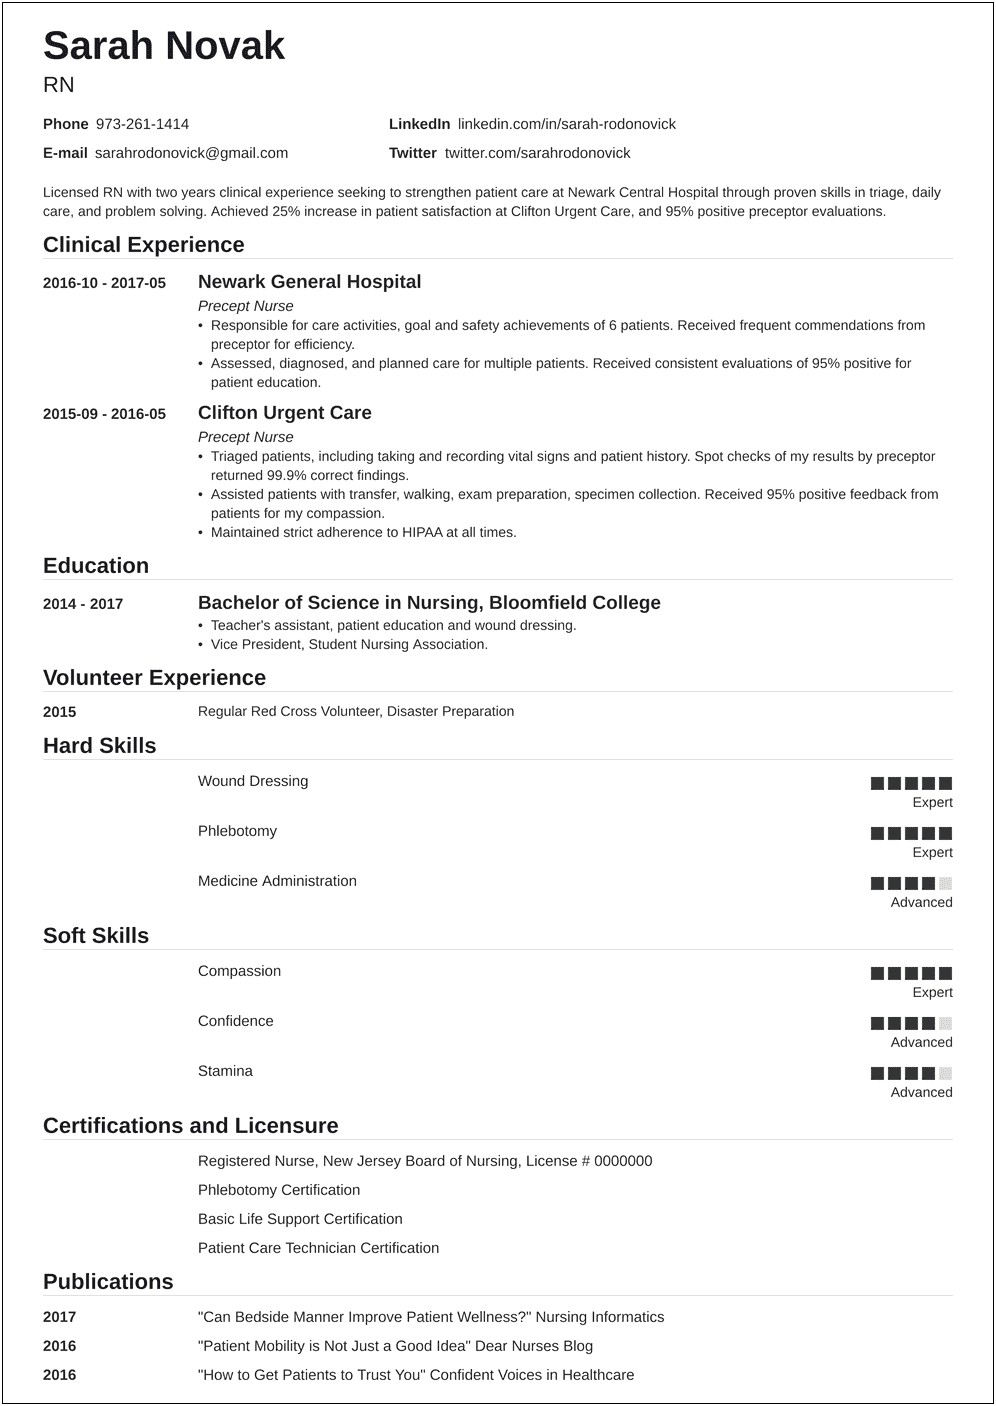 L&d Student Nurse Clinical Experience Resume